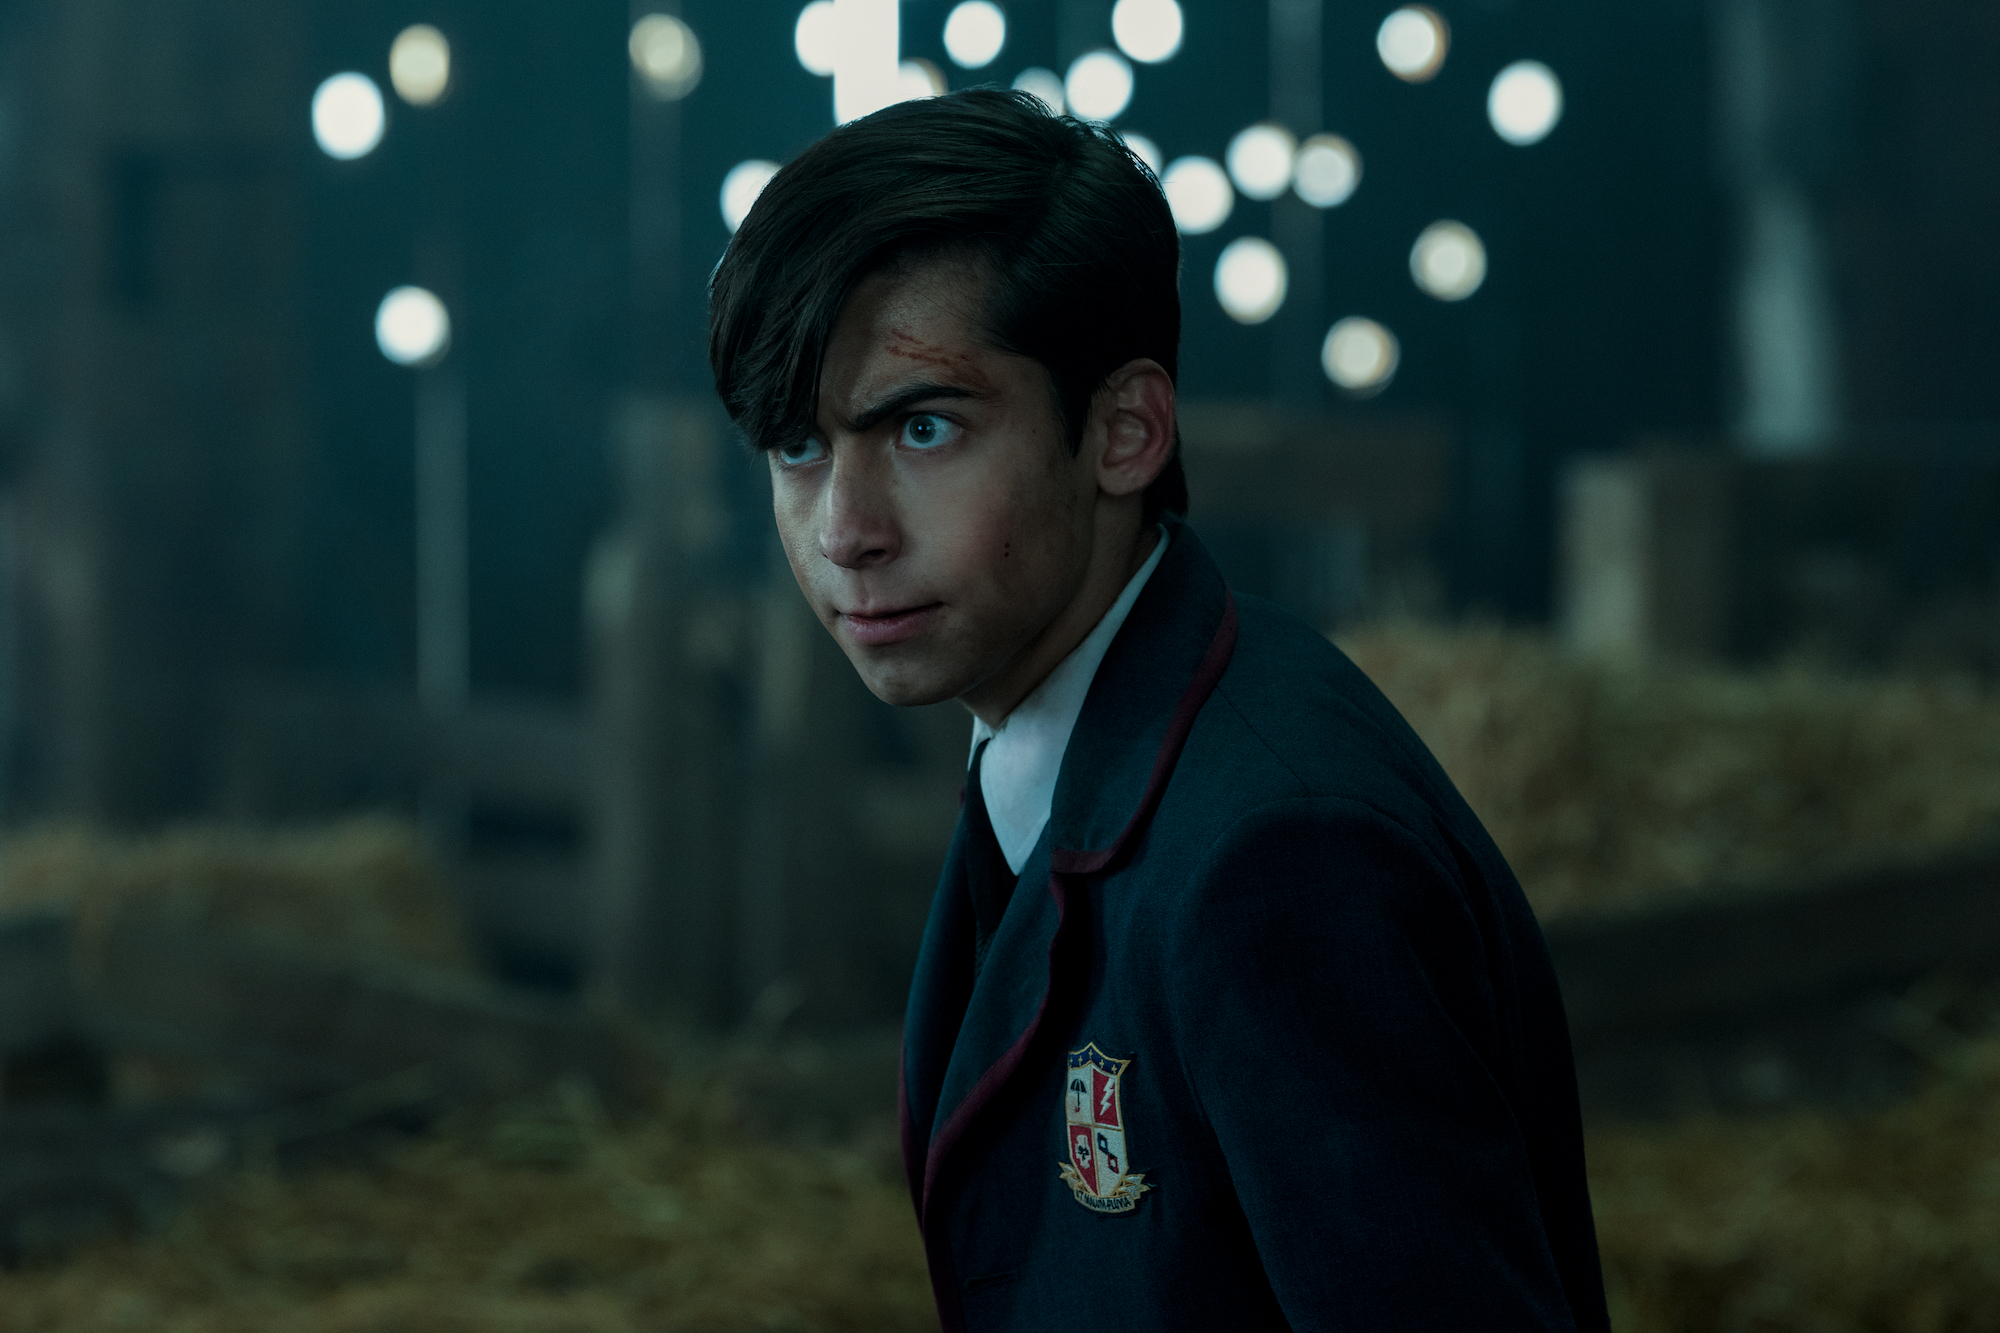 'The Umbrella Academy' character Number Five, played by Aiden Gallagher, standing in a bard in his uniform with scratches on his face.